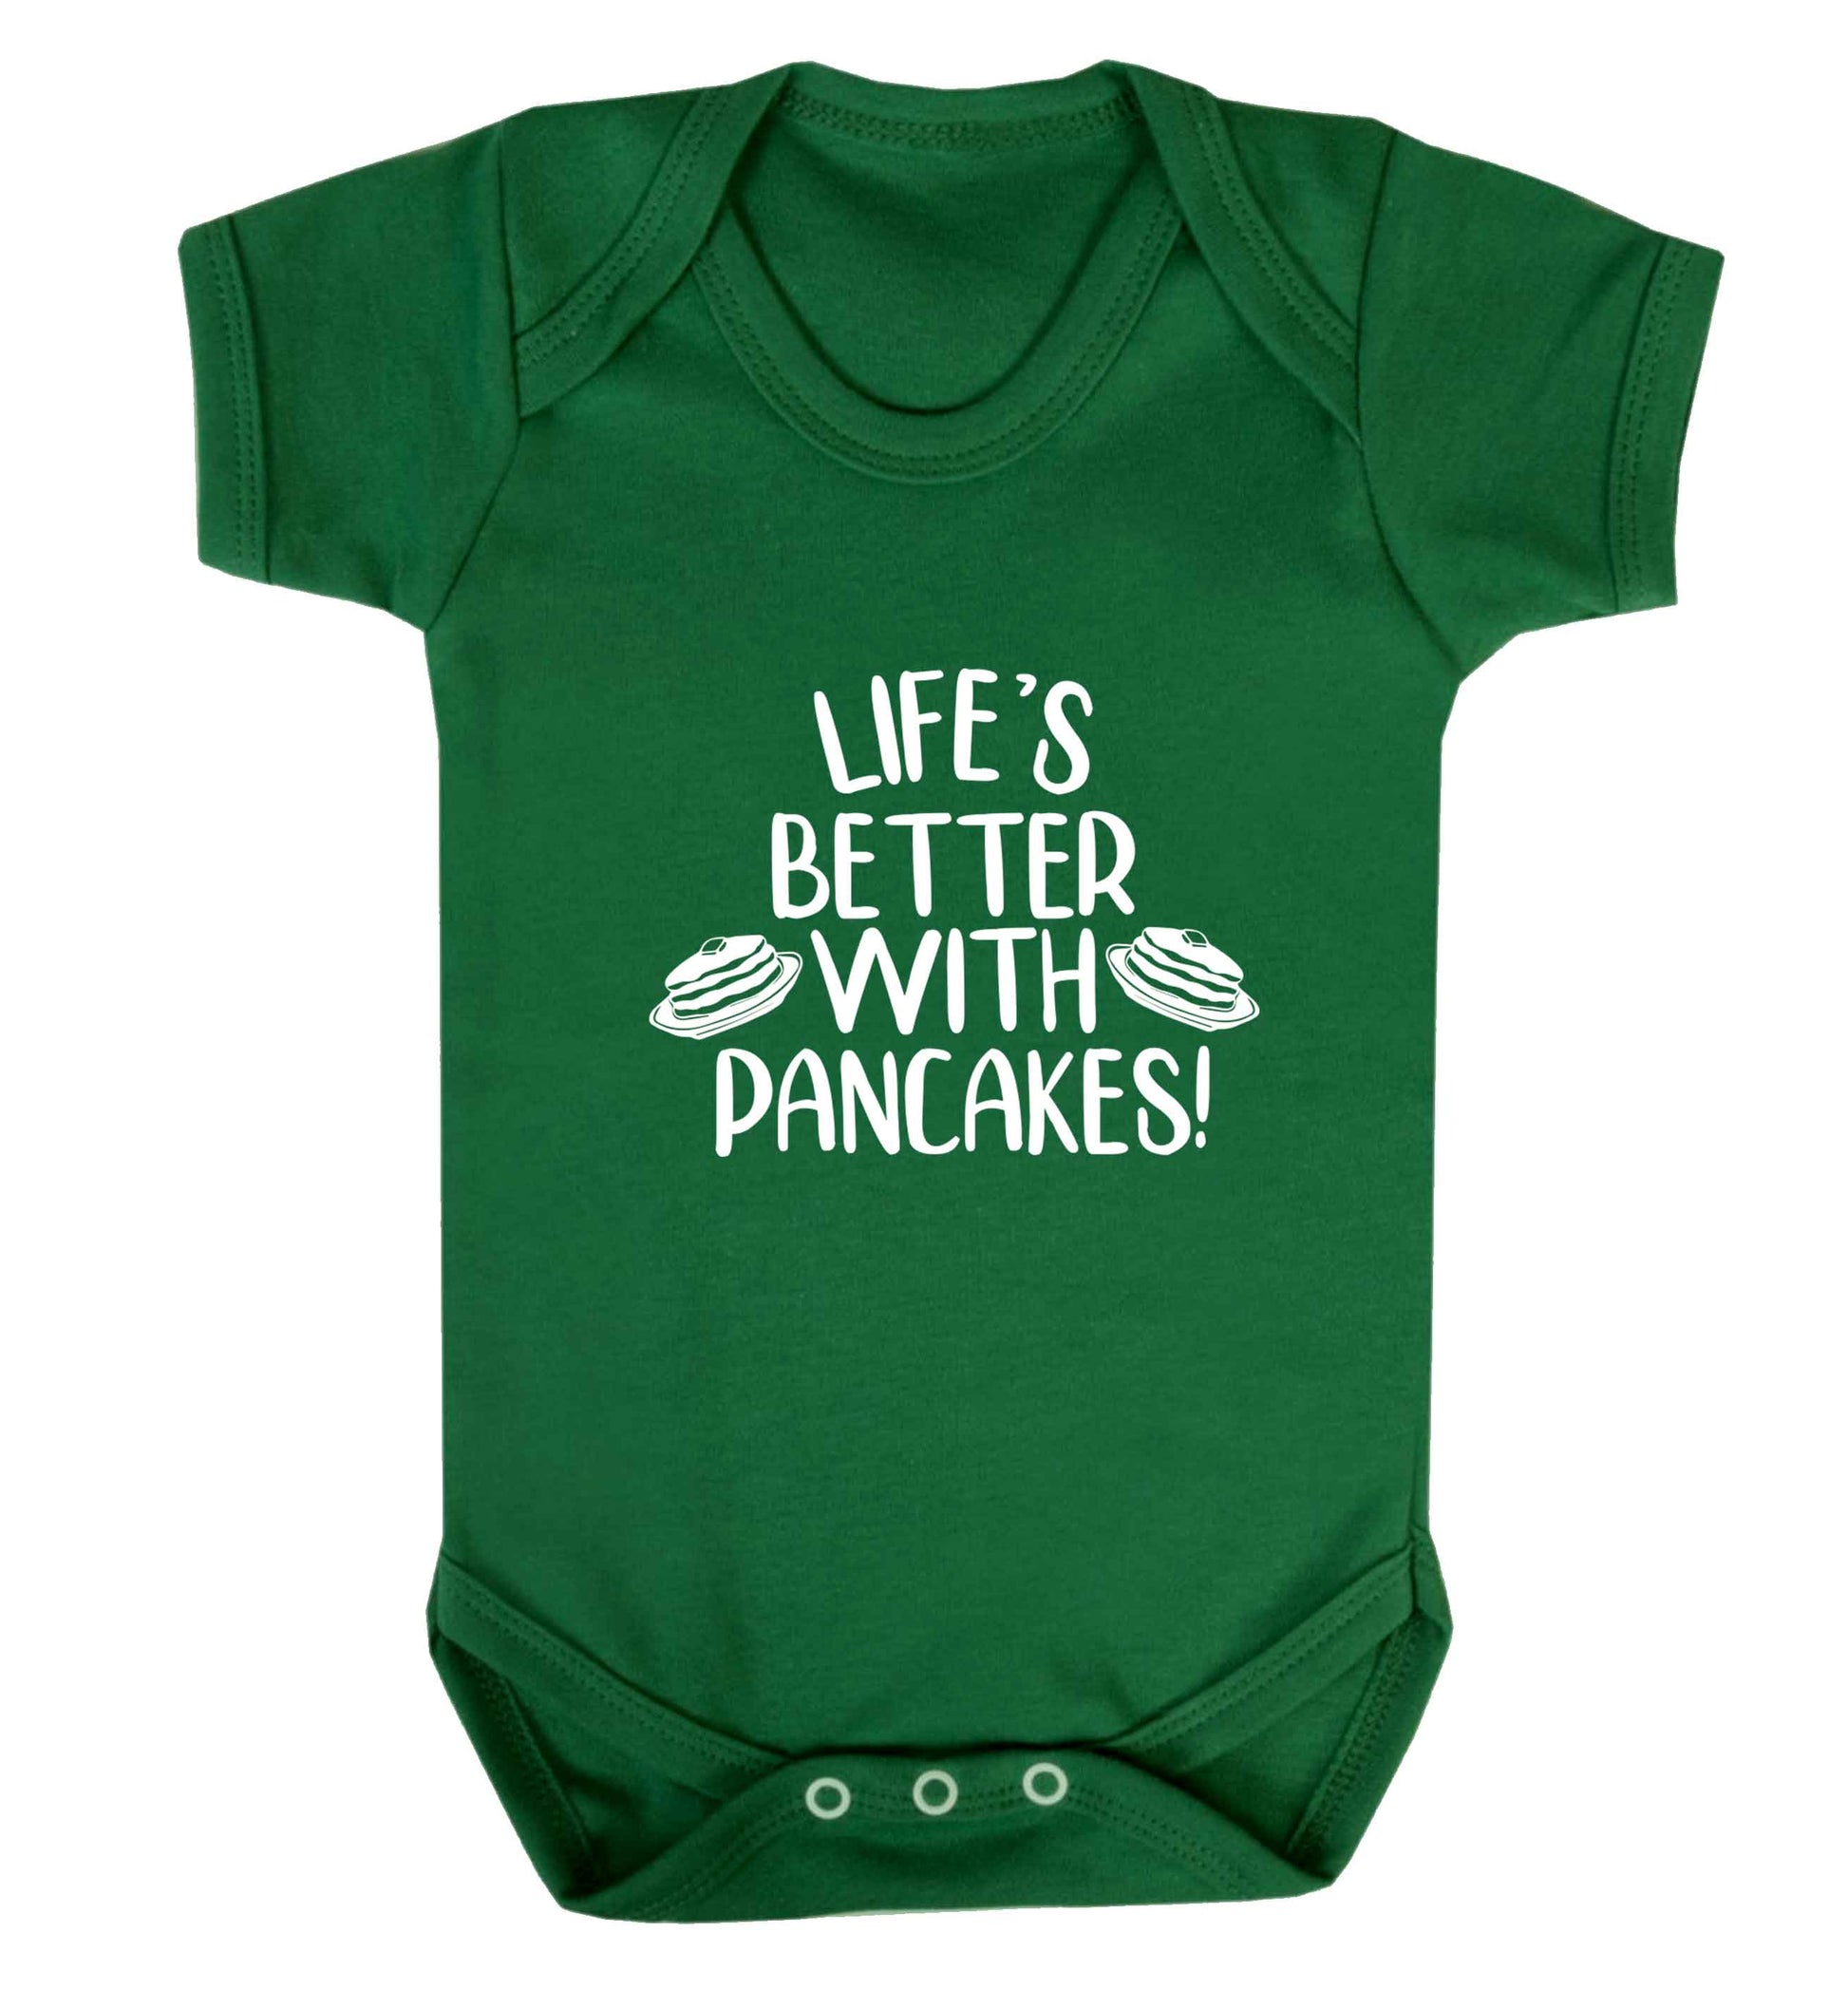 Life's better with pancakes baby vest green 18-24 months